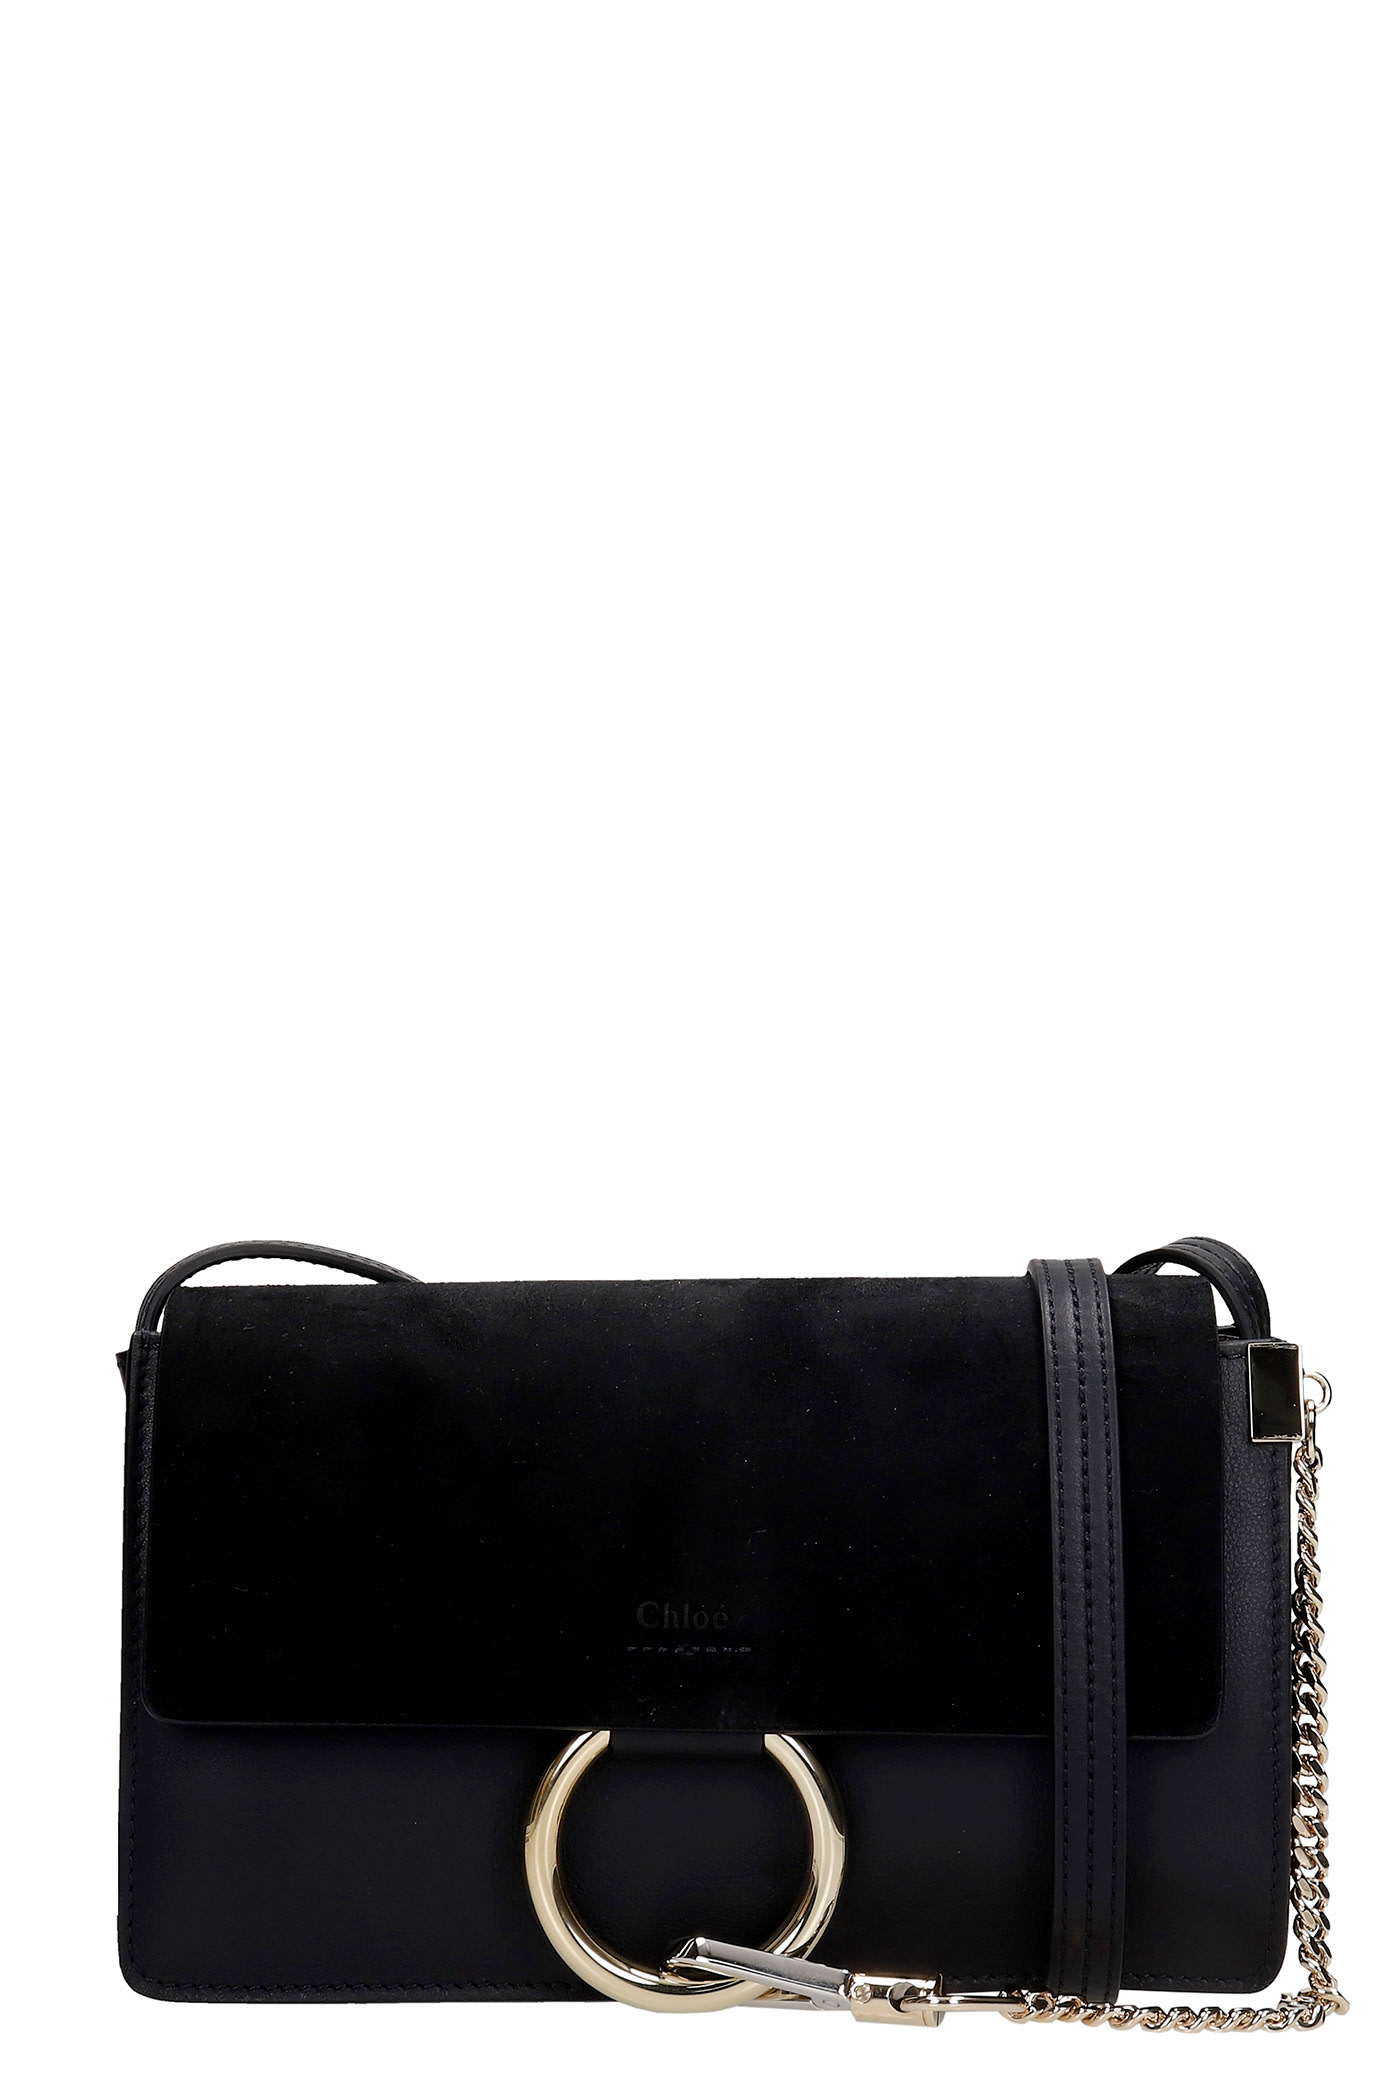 Chloé Faye Small Shoulder Bag In Black Suede And Leather